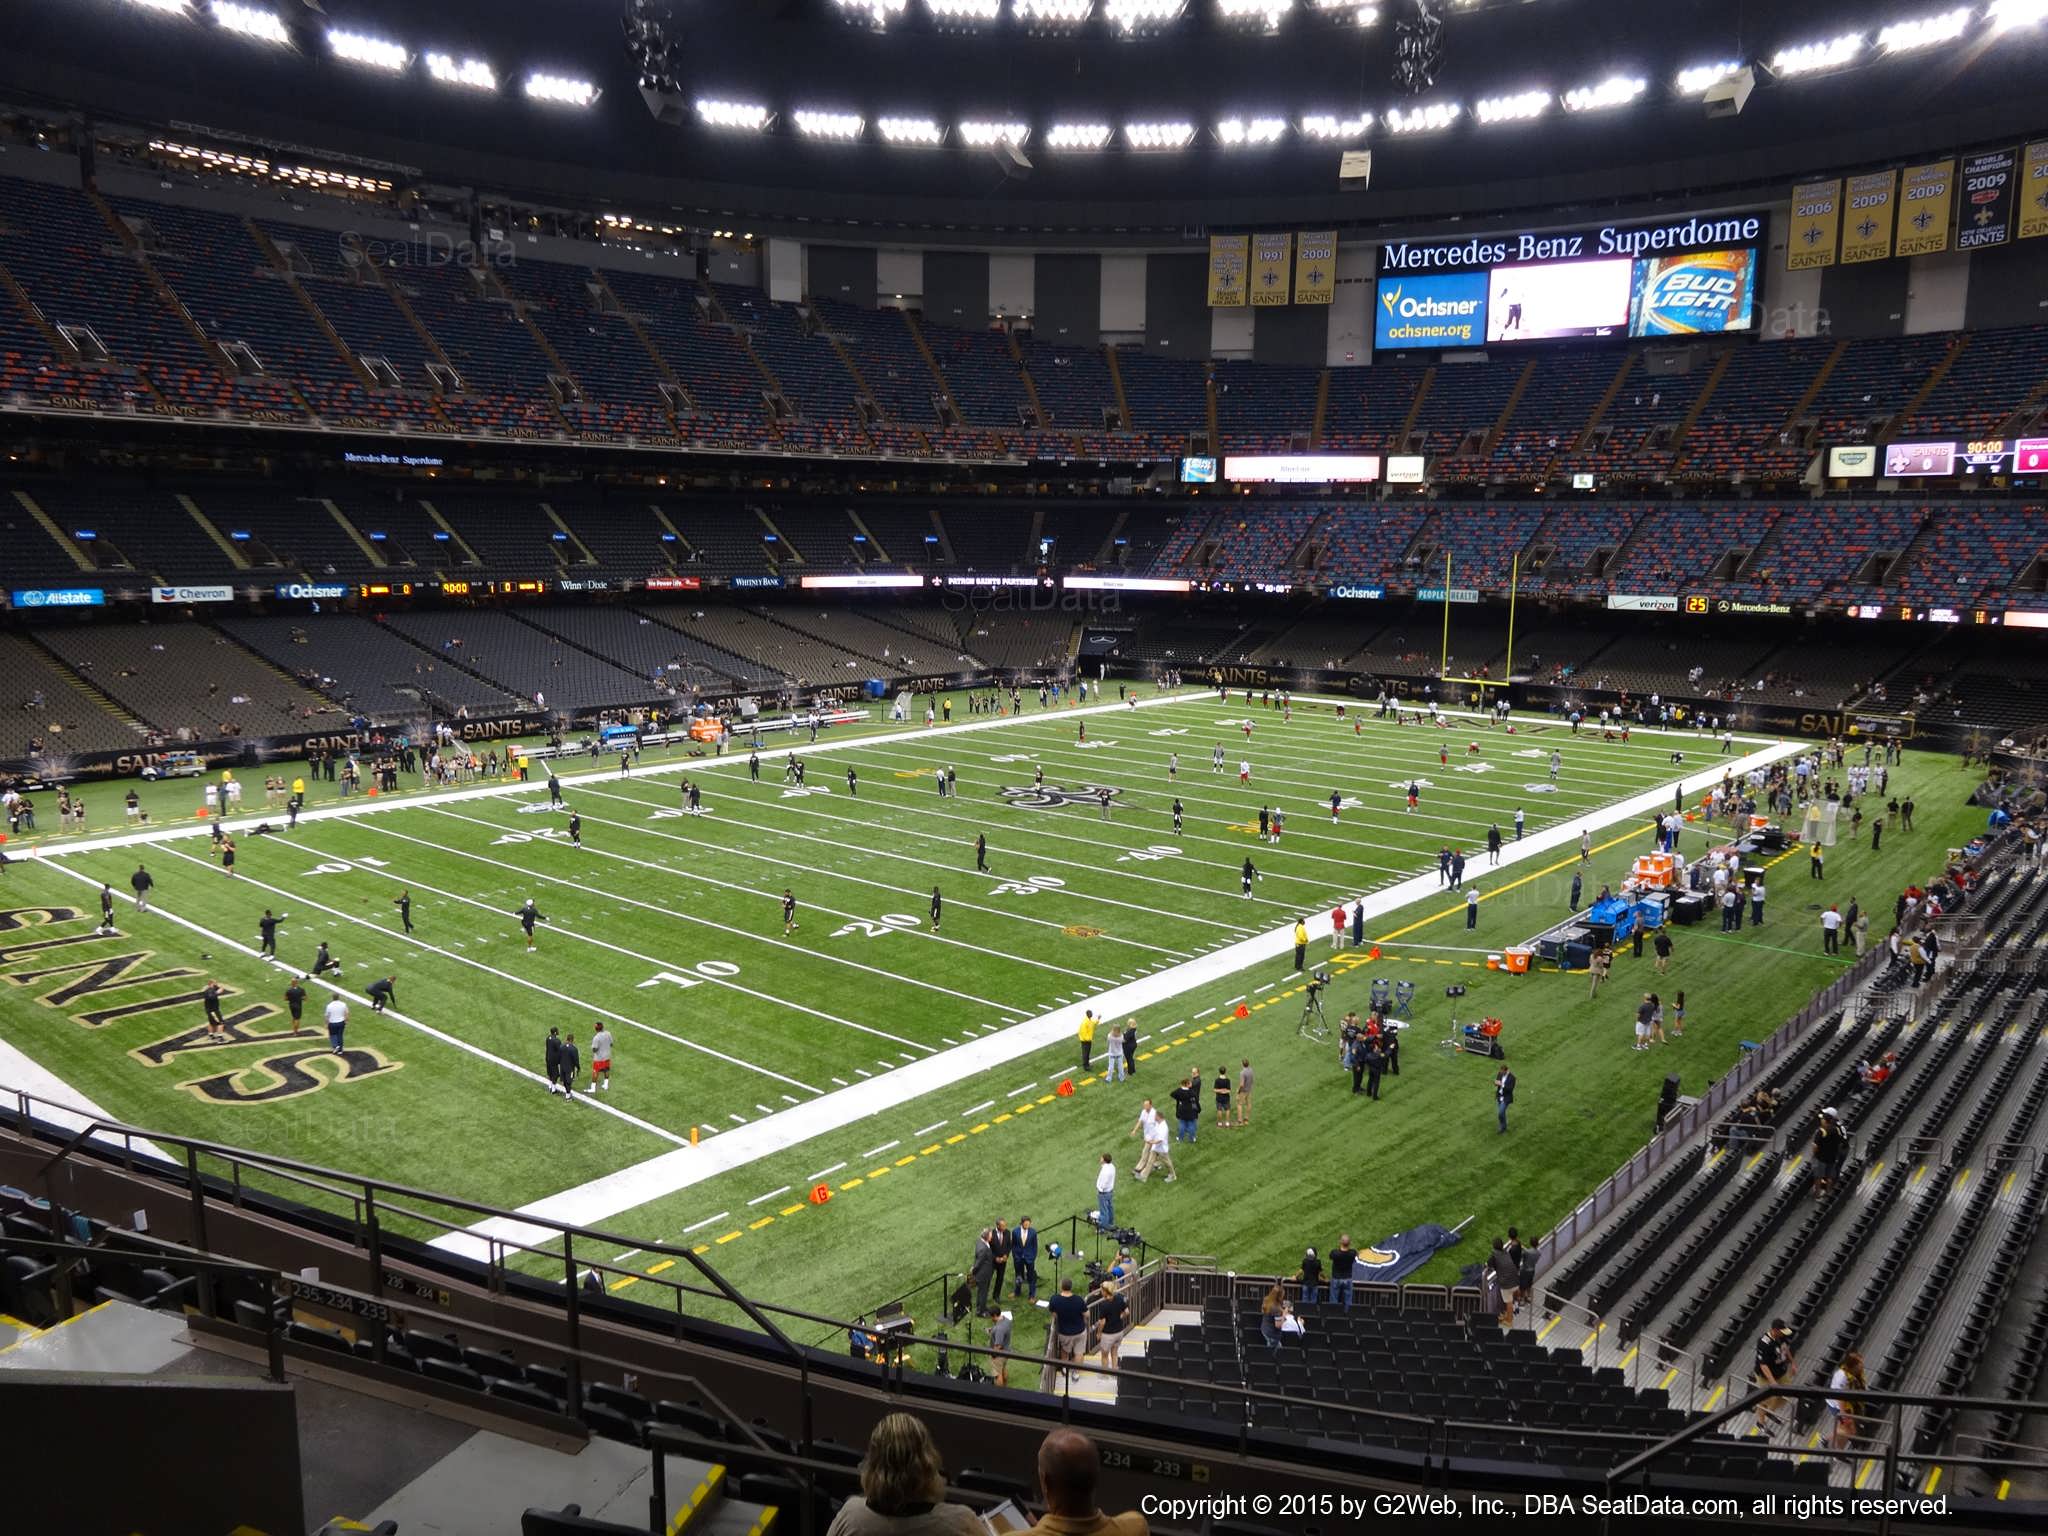 Seat view from section 319 at the Mercedes-Benz Superdome, home of the New Orleans Saints